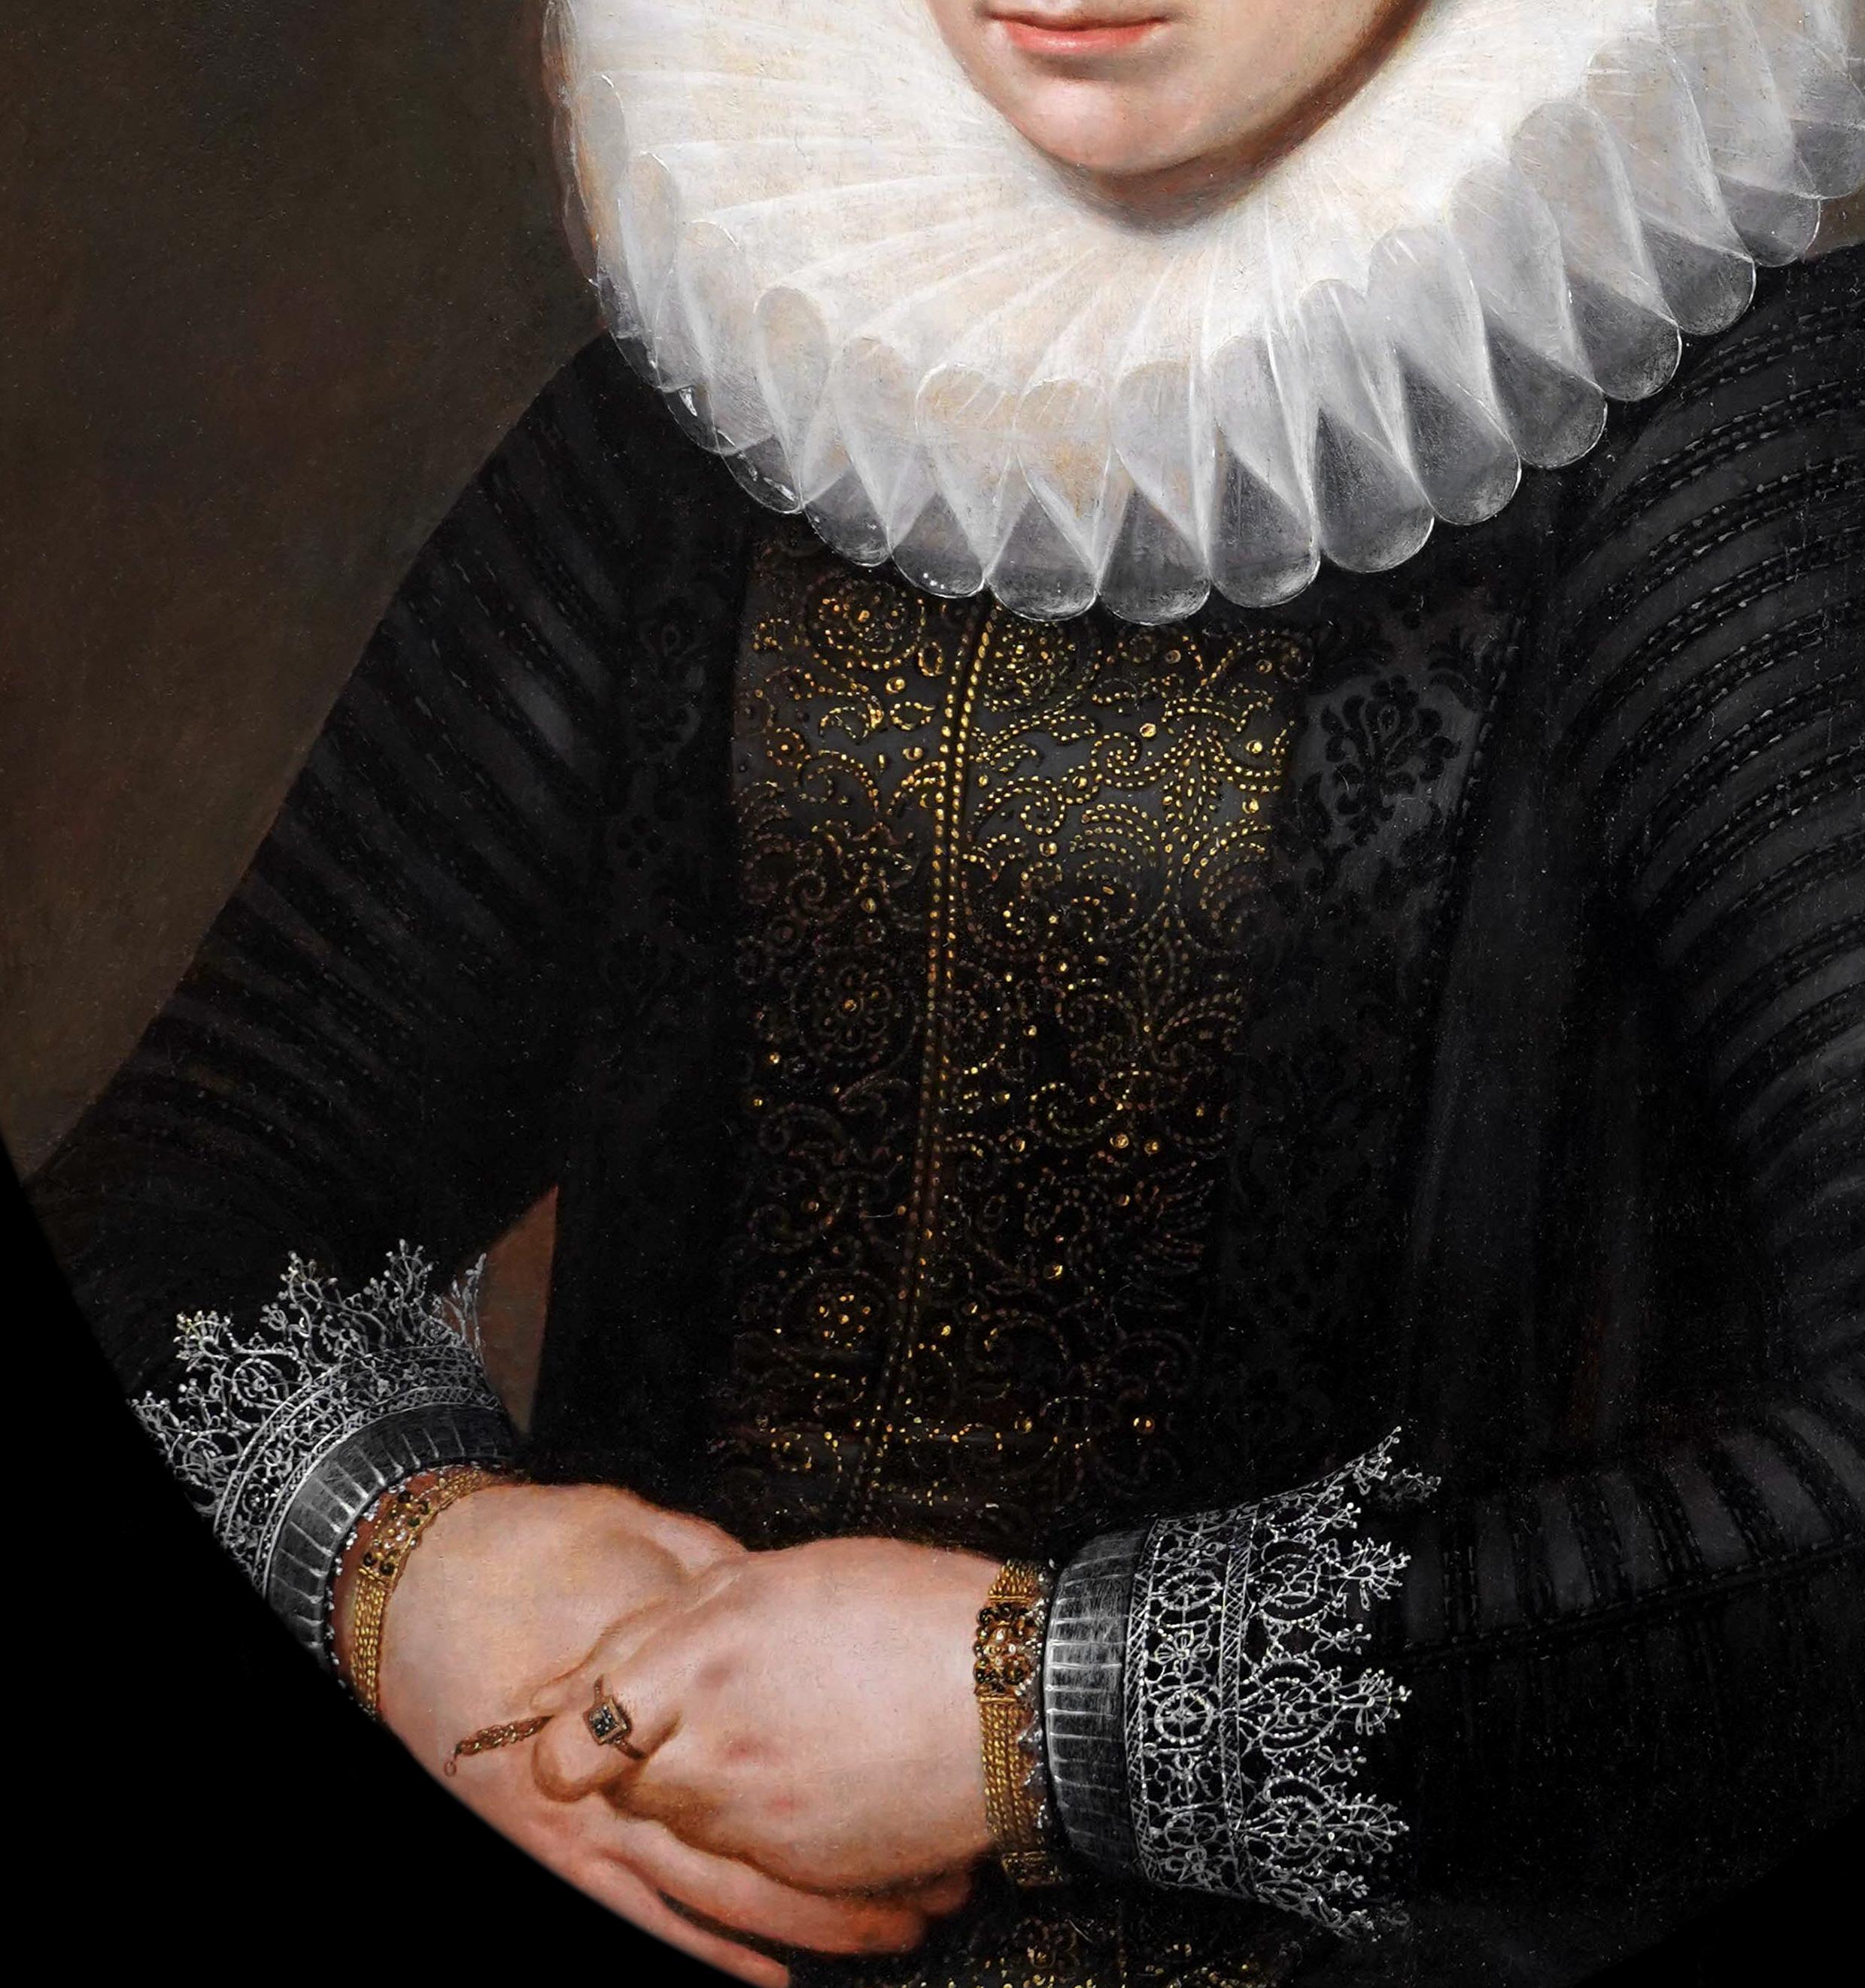 Portrait of a Lady in an Elaborate Ruff & Lace Coif c.1610-20, Dutch Old Master For Sale 4